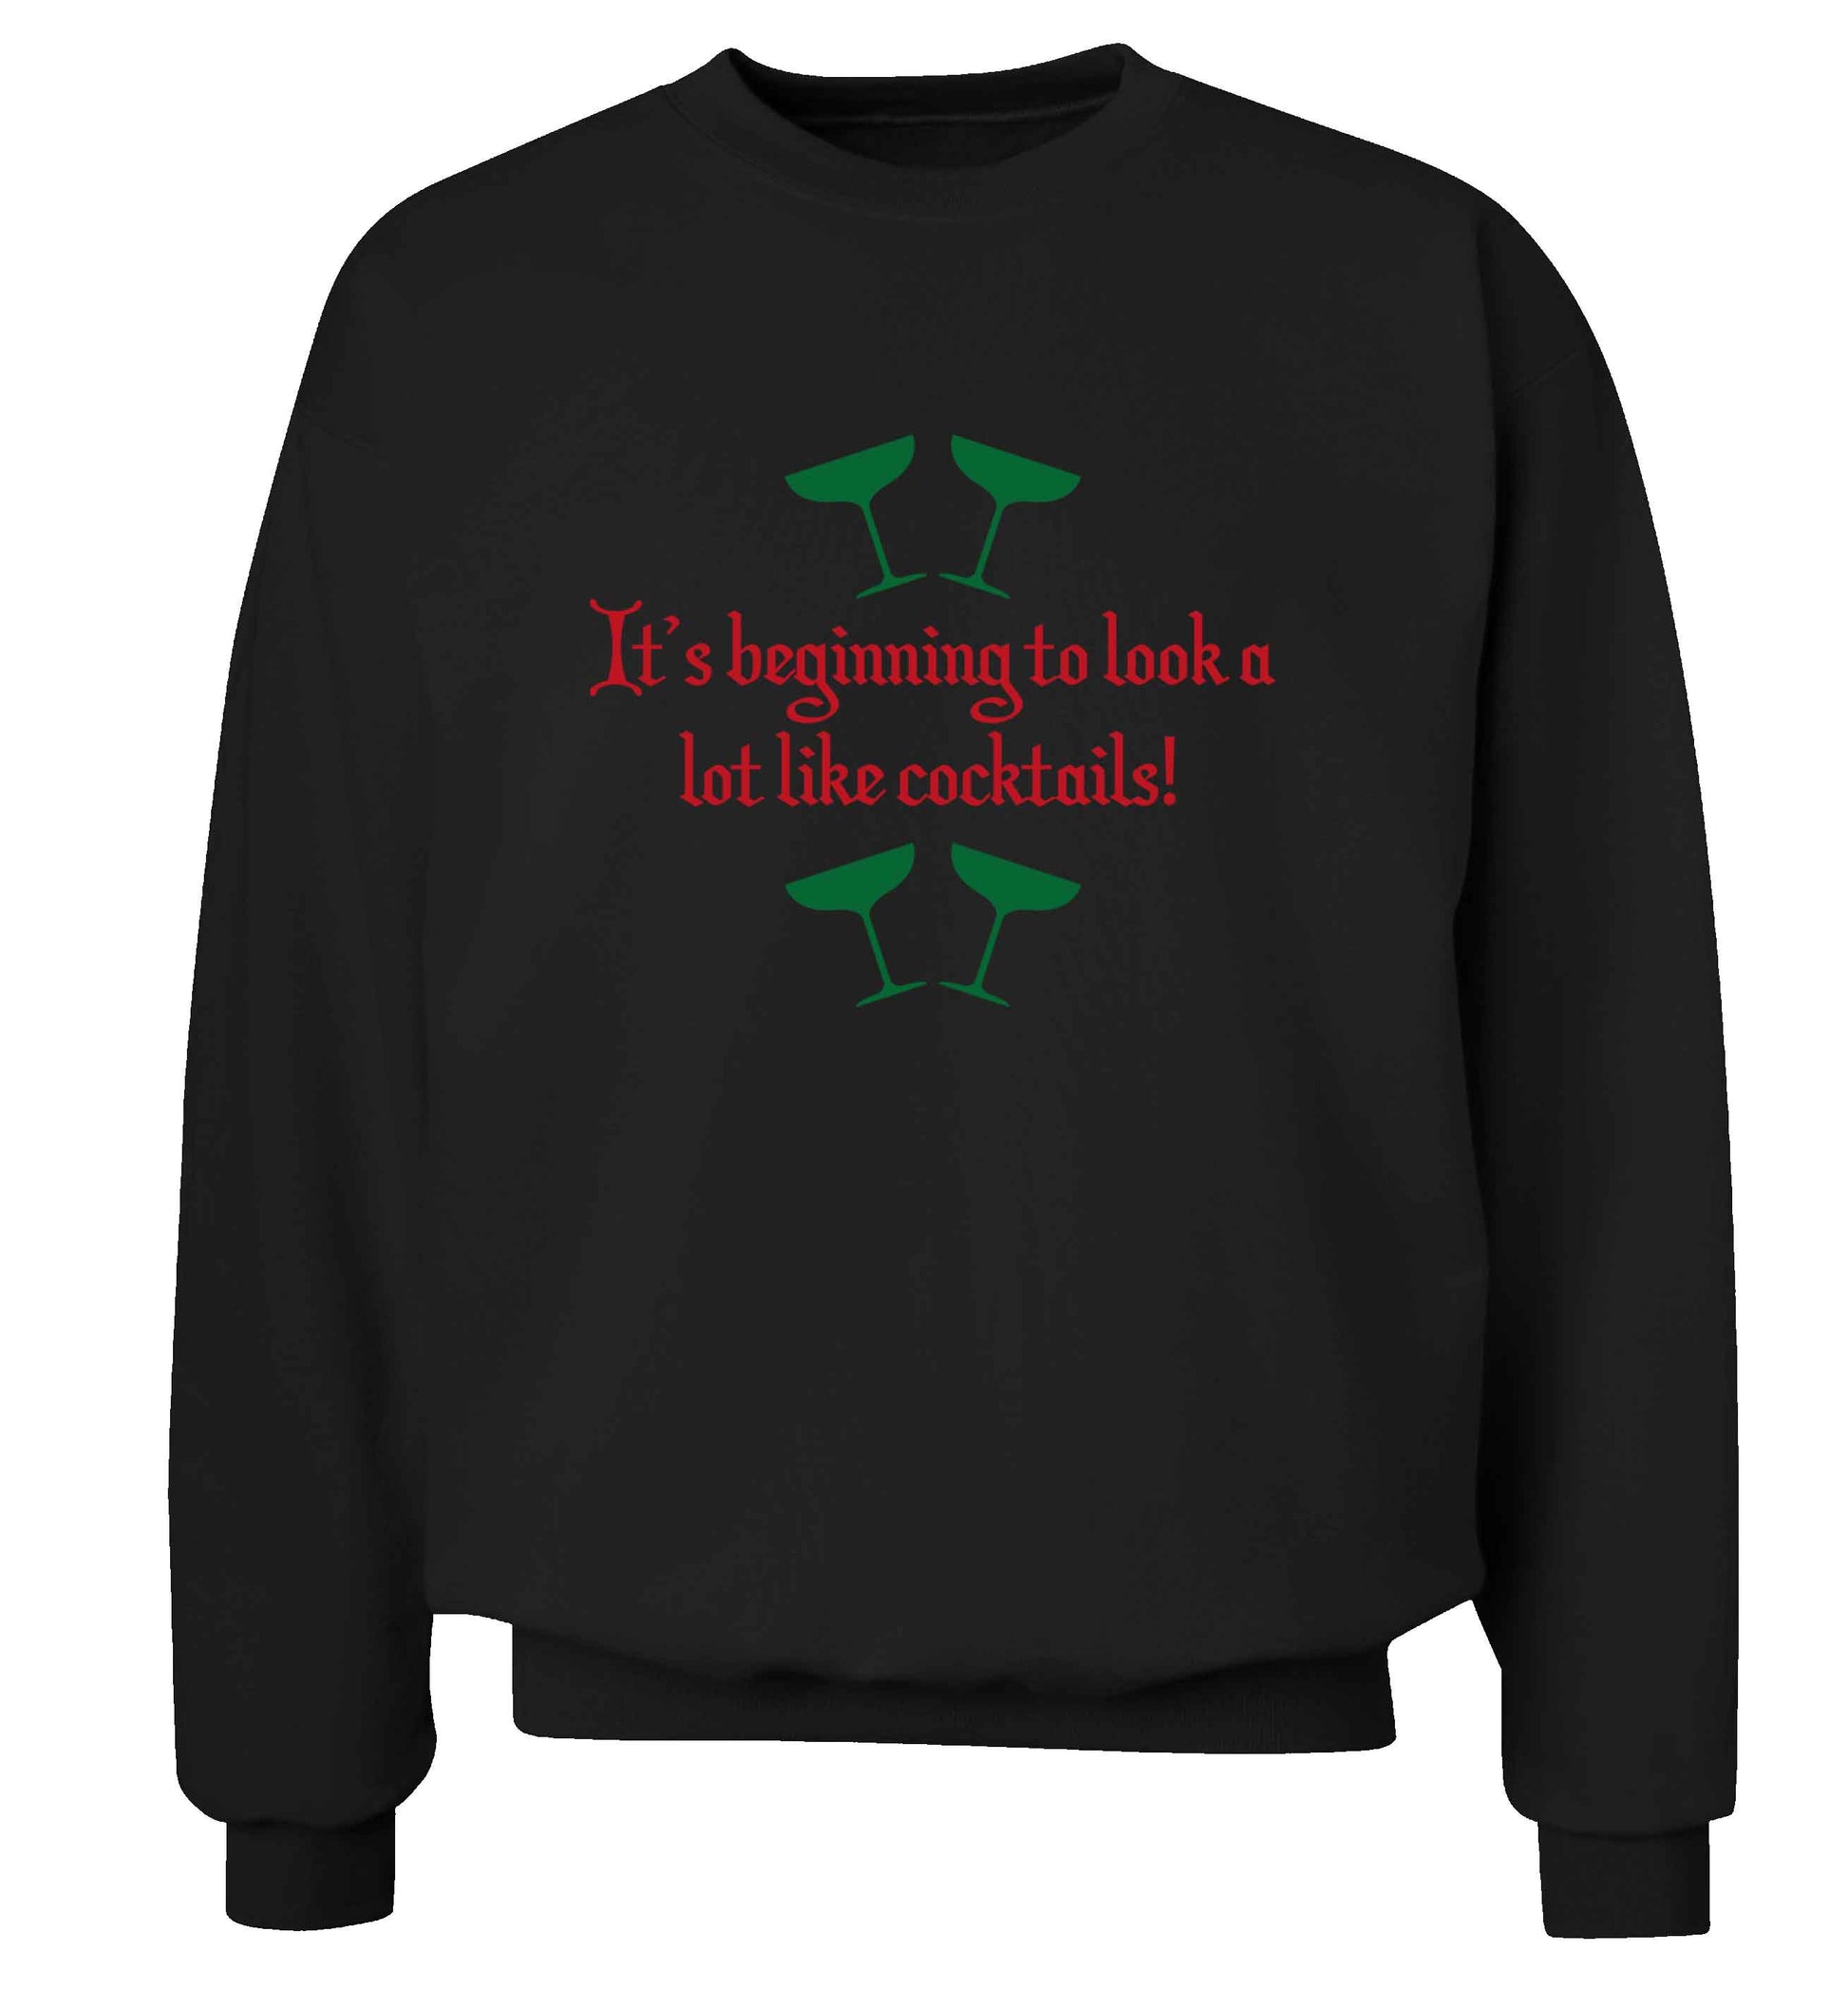 It's beginning to look a lot like cocktails Adult's unisex black Sweater 2XL